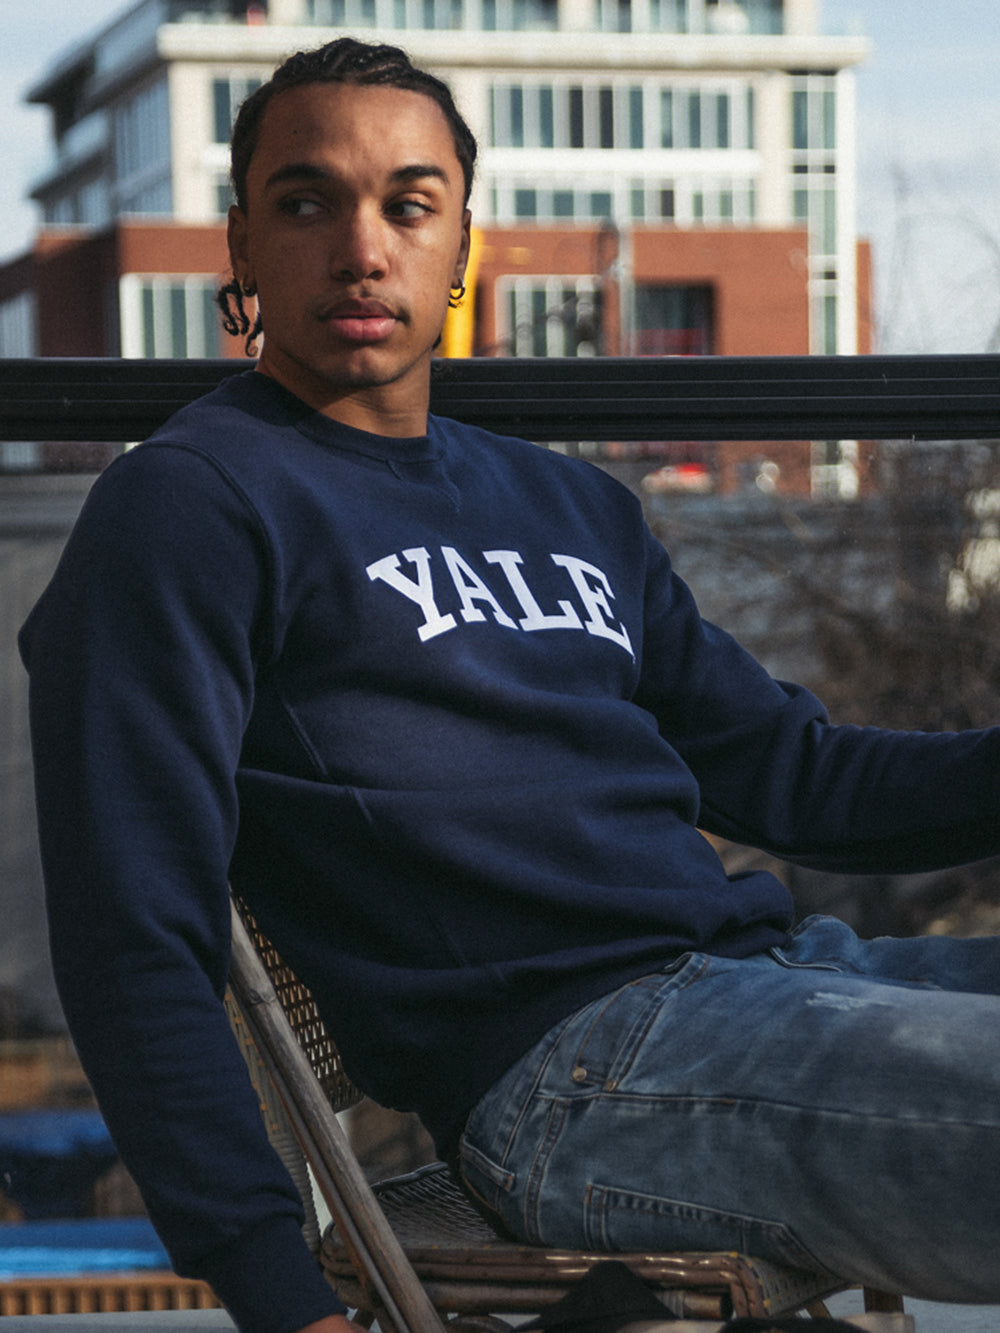 RUSSELL YALE CREWNECK - DÉSTOCKAGE